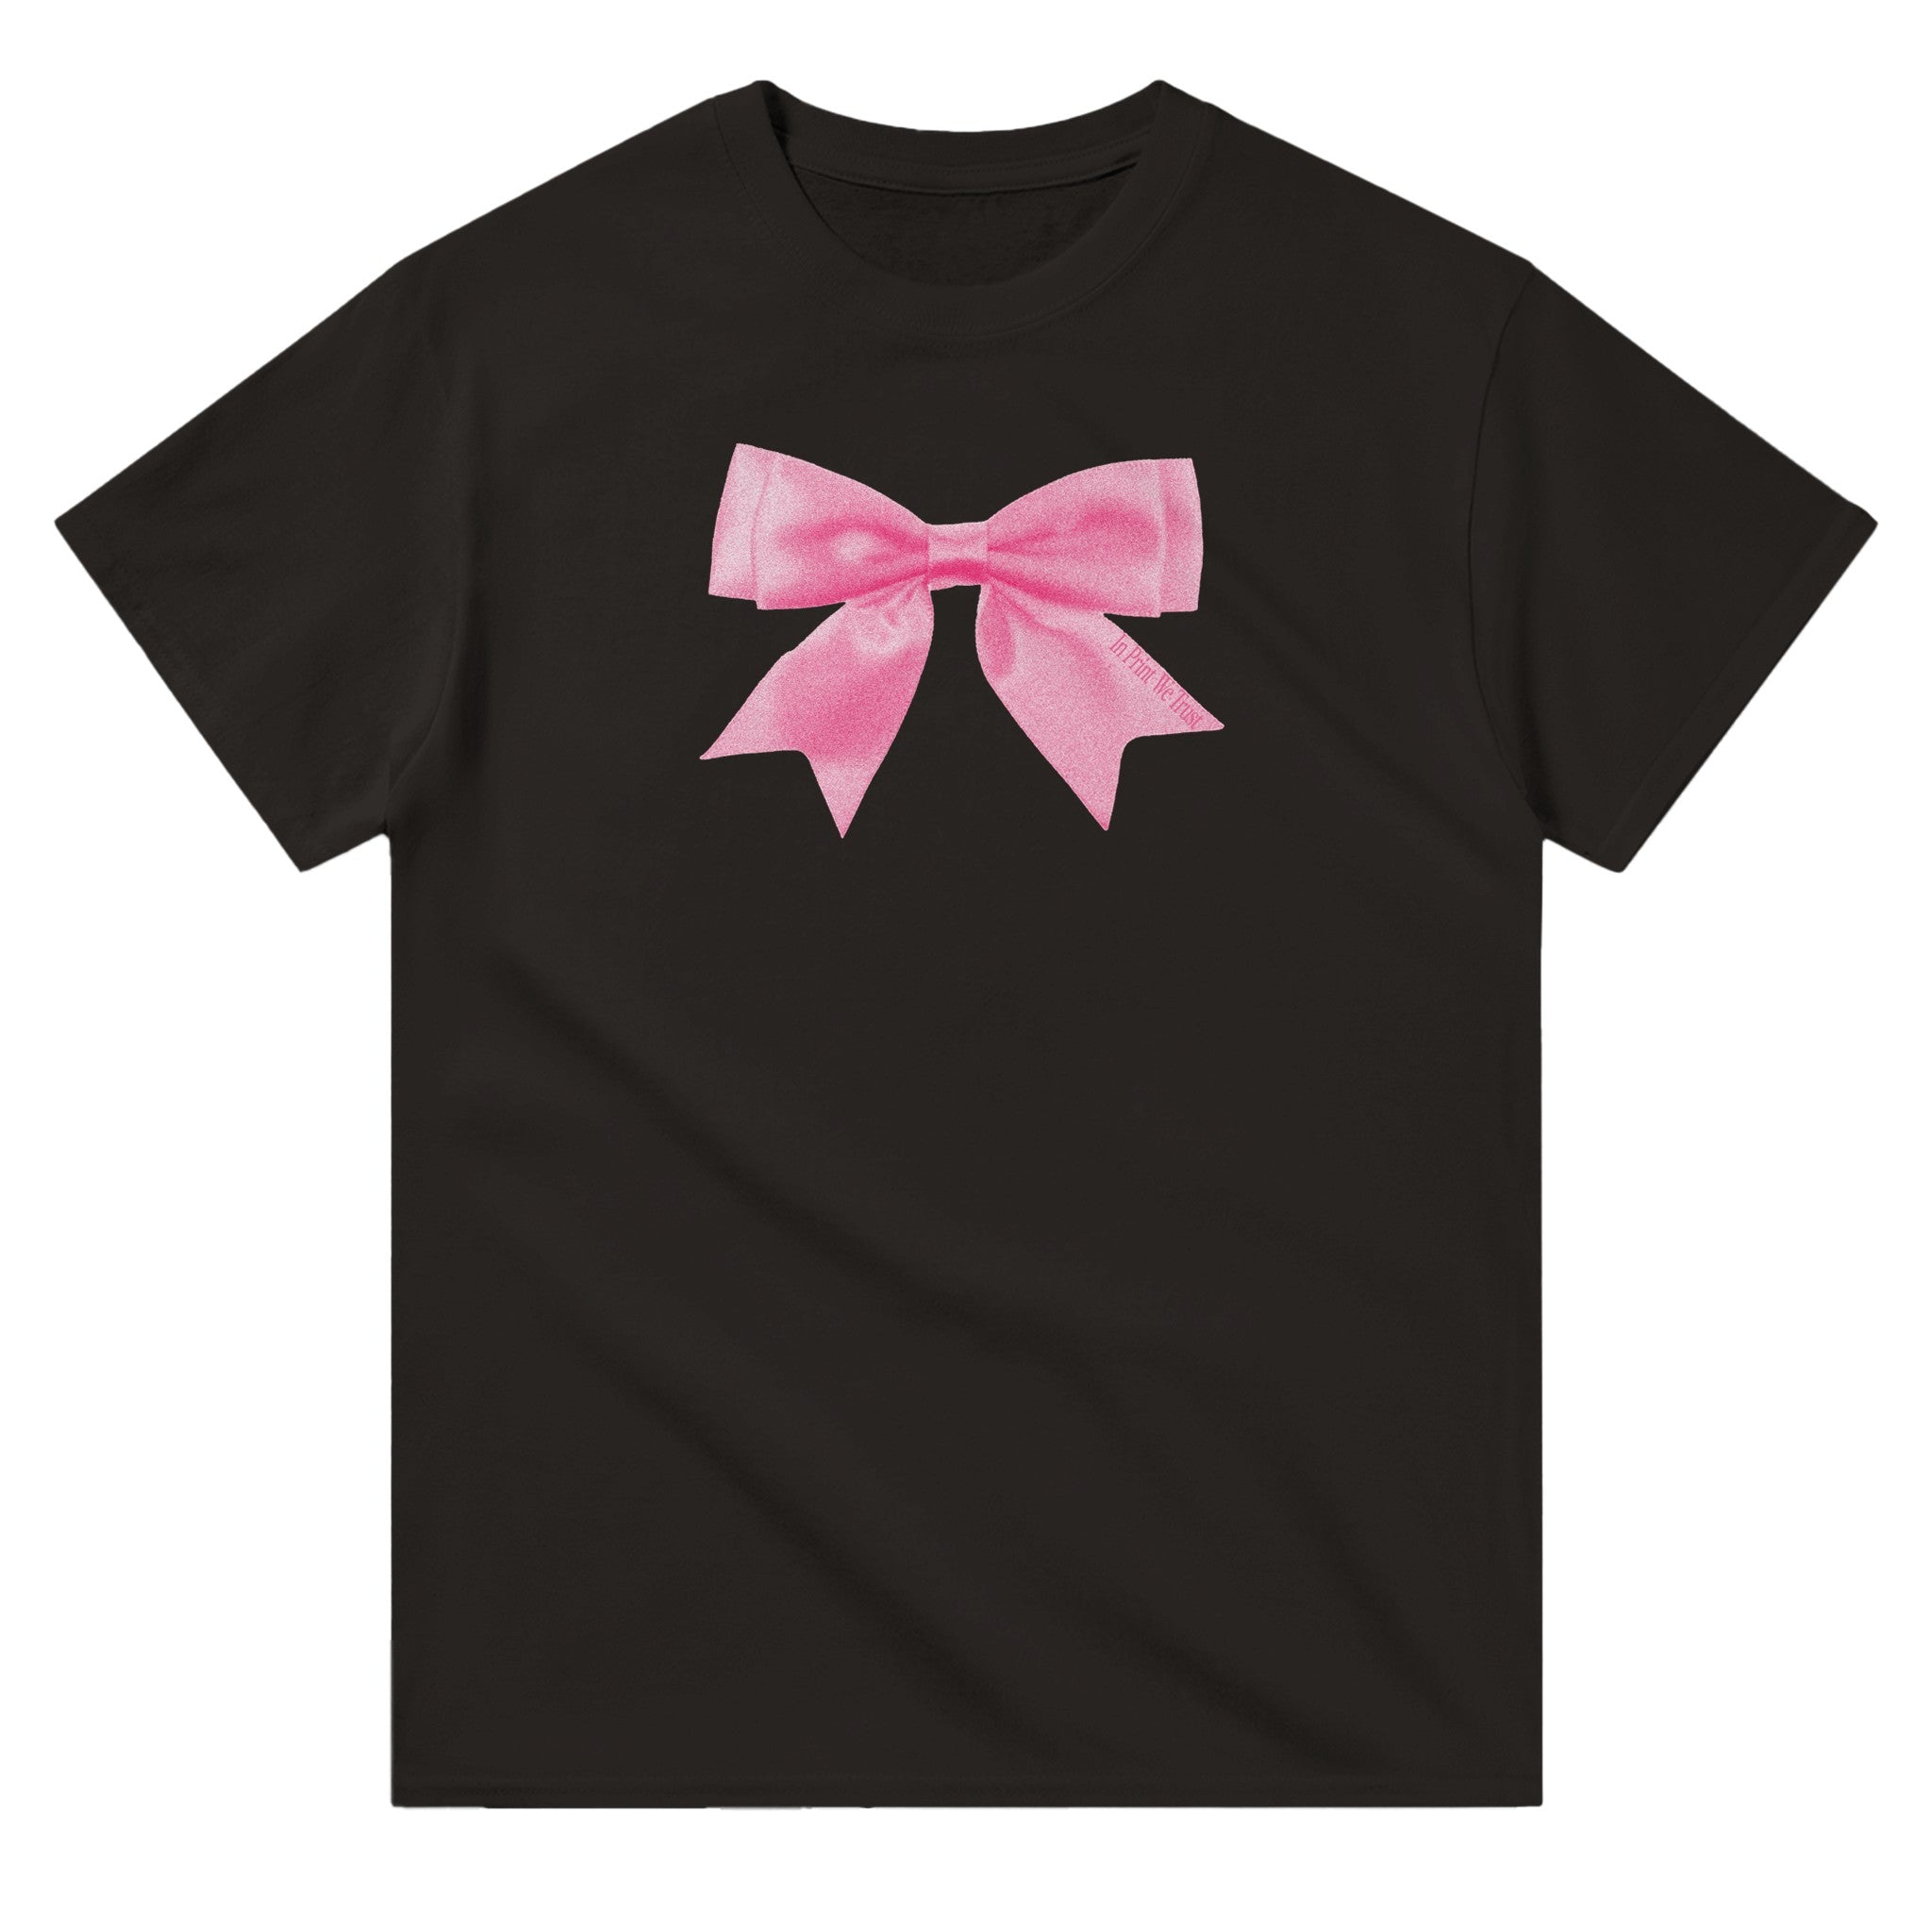 'Put a Bow On It' classic tee - In Print We Trust